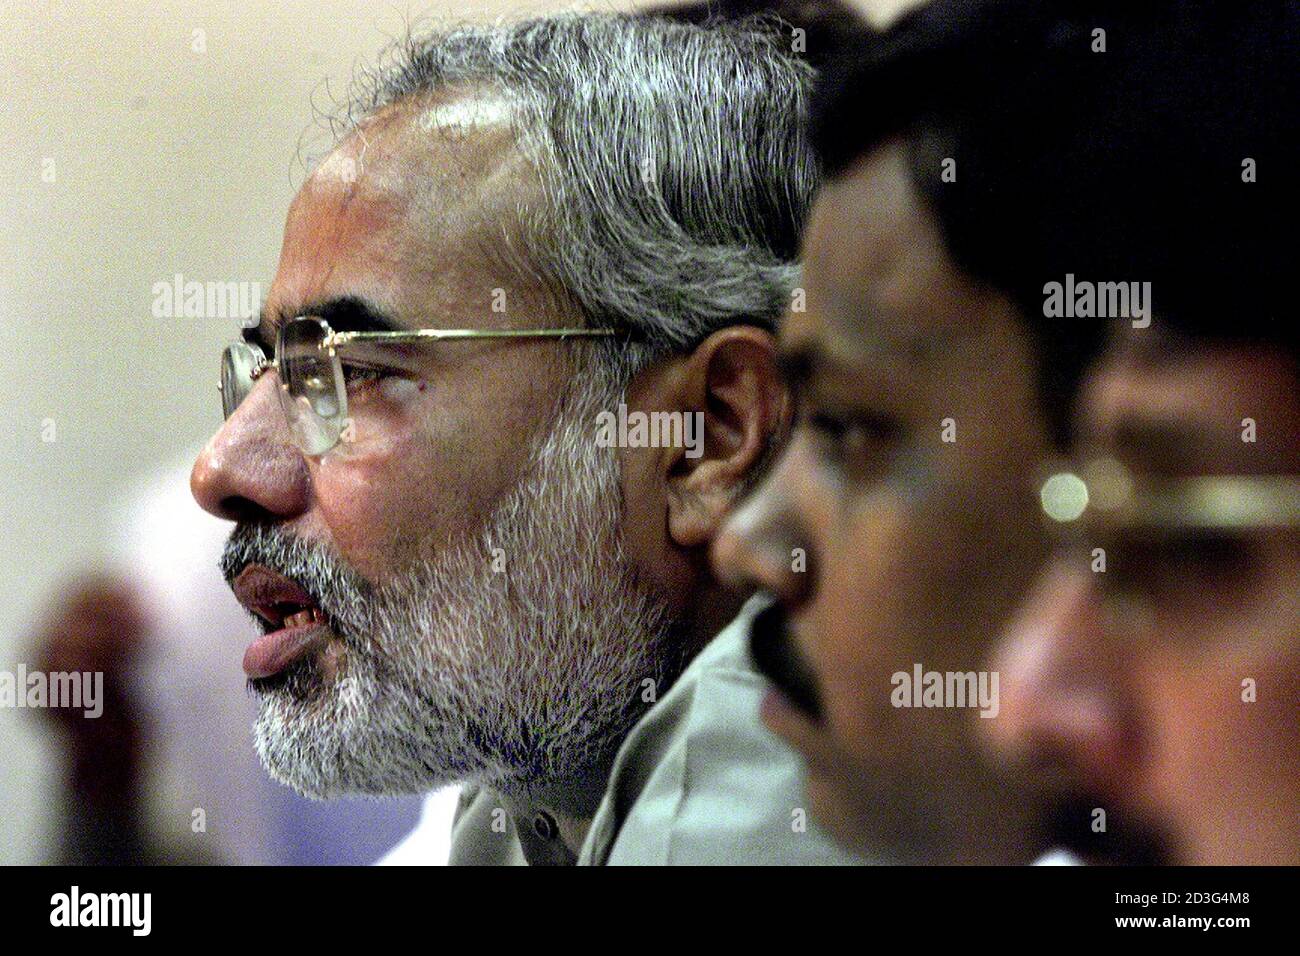 Senior Bharatiya Janata Party (BJP) leader and Chief Minister of Gujarat,  Narendra Modi, addresses a press conference in Bombay, March 30, 2002.  Members belonging to several human rights organisations protested against  Modi